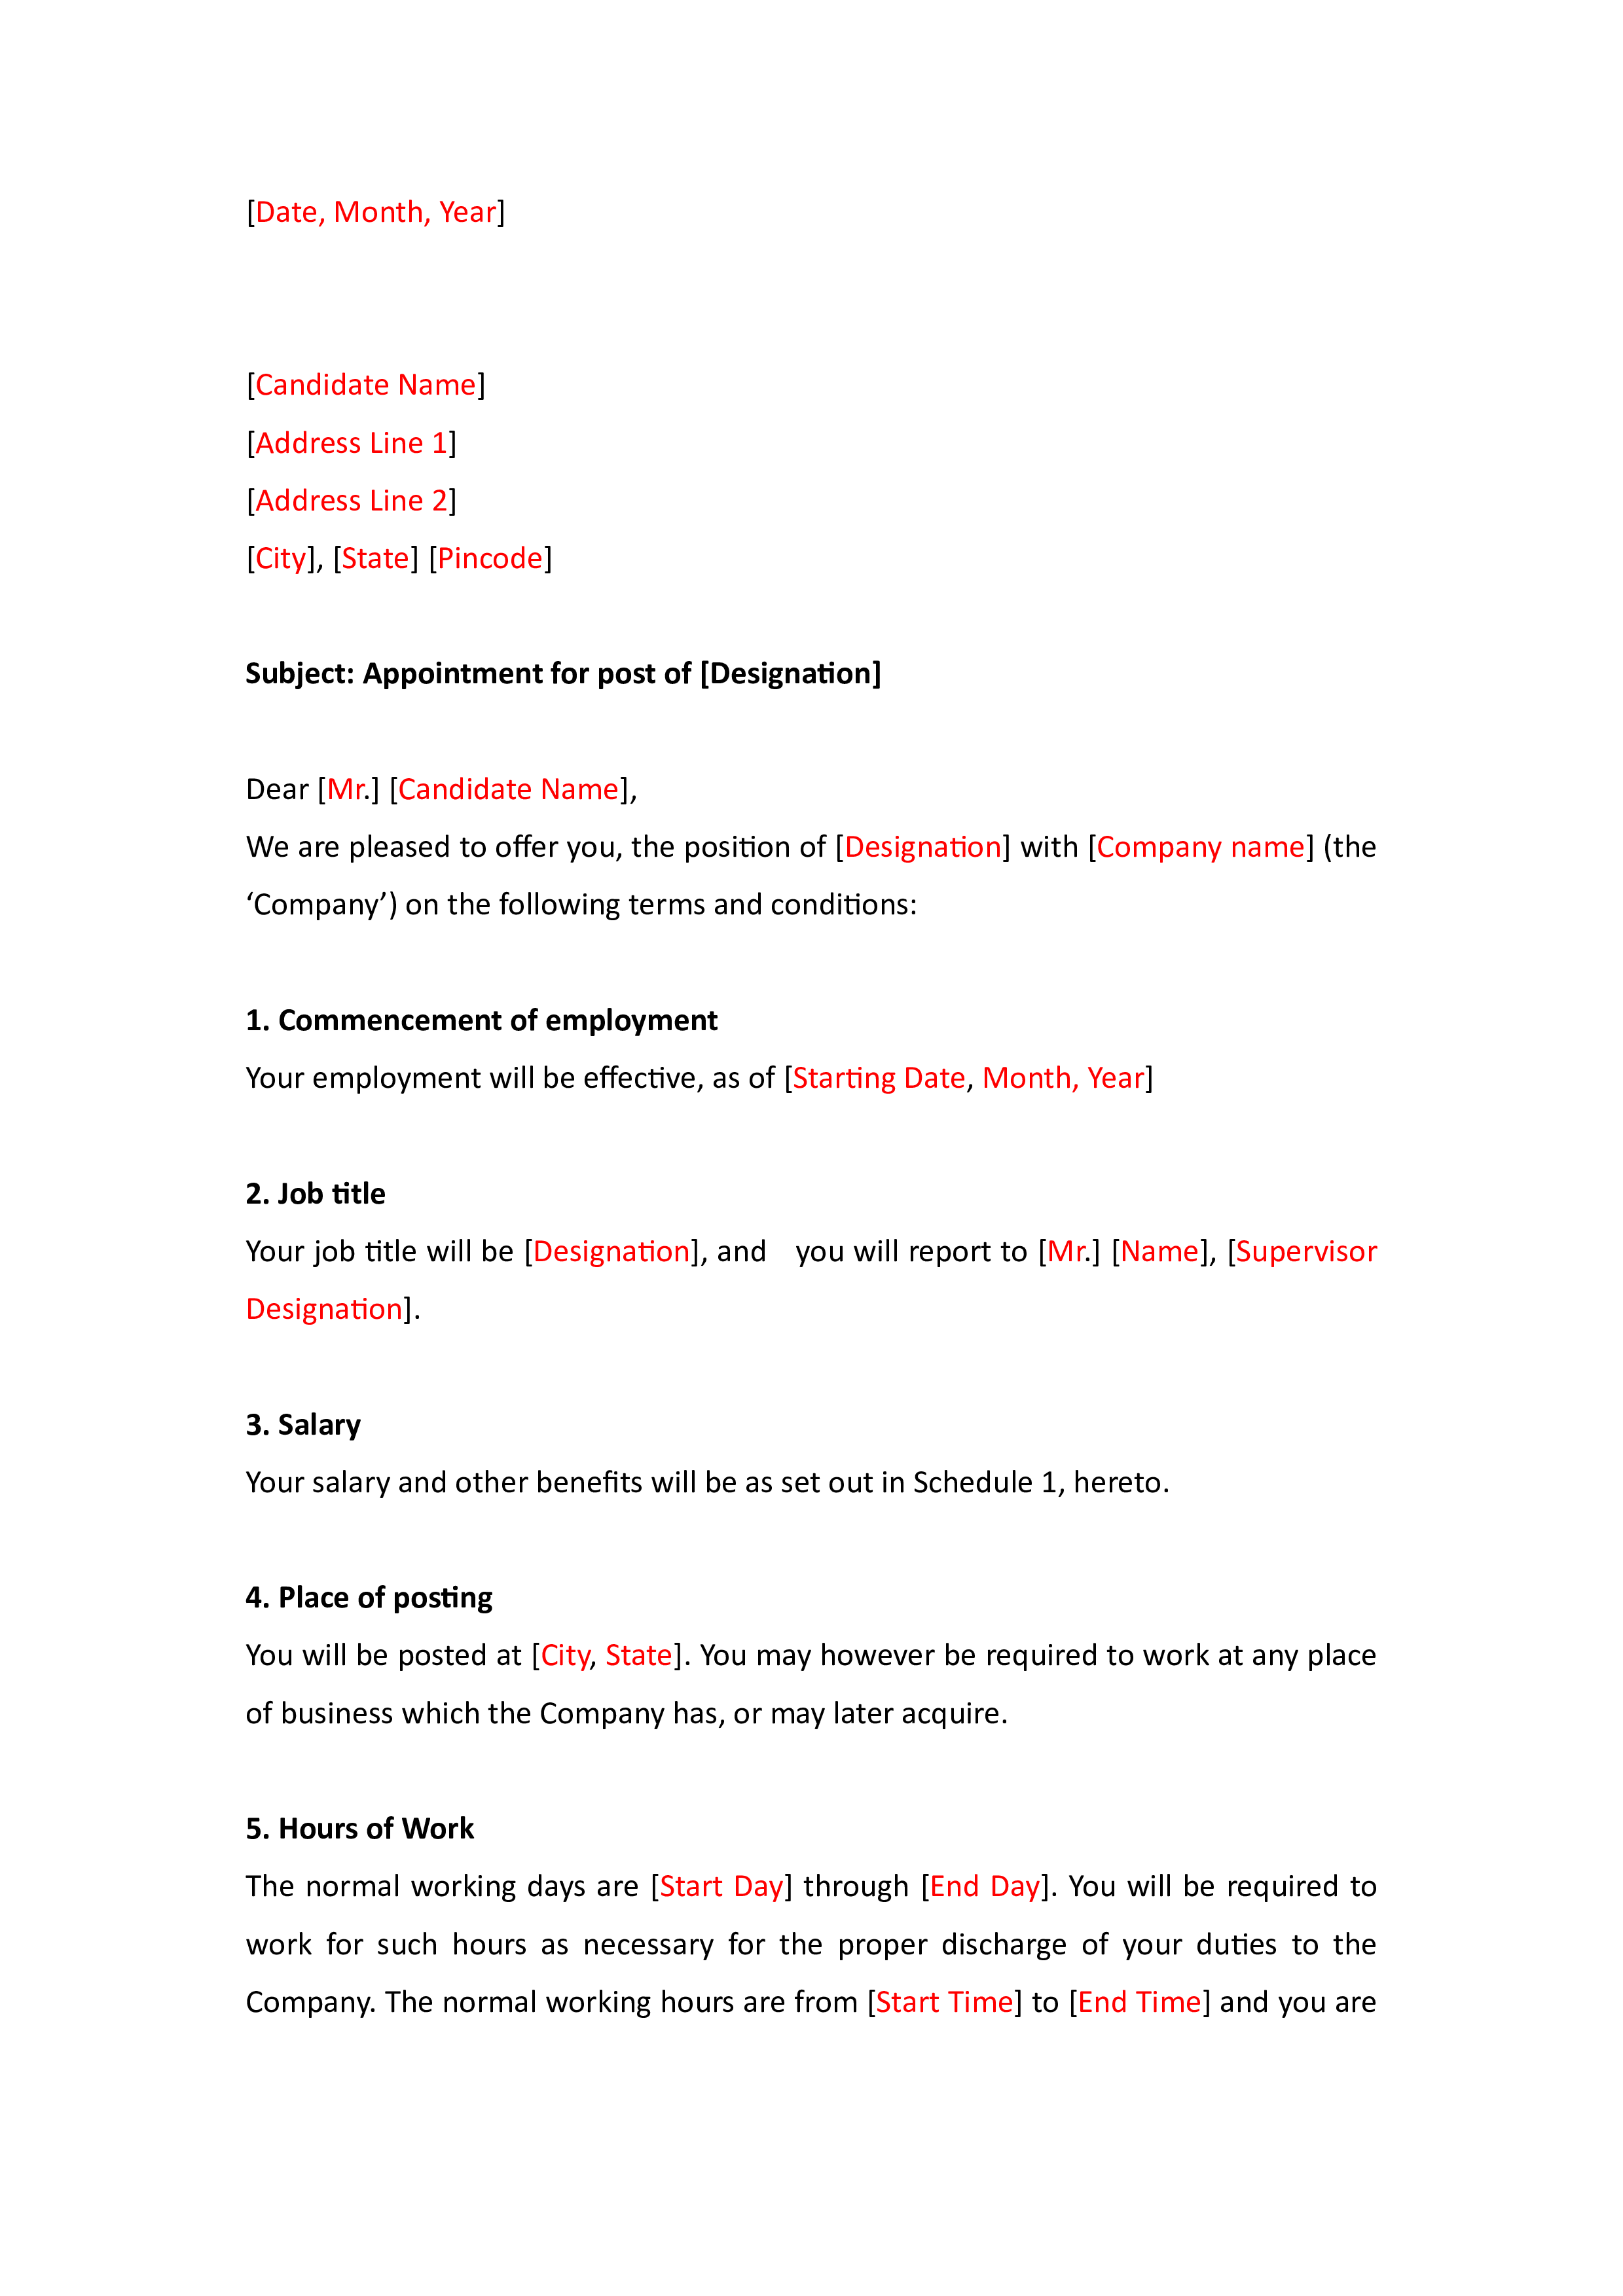 Trainee Appointment Letter Format 模板